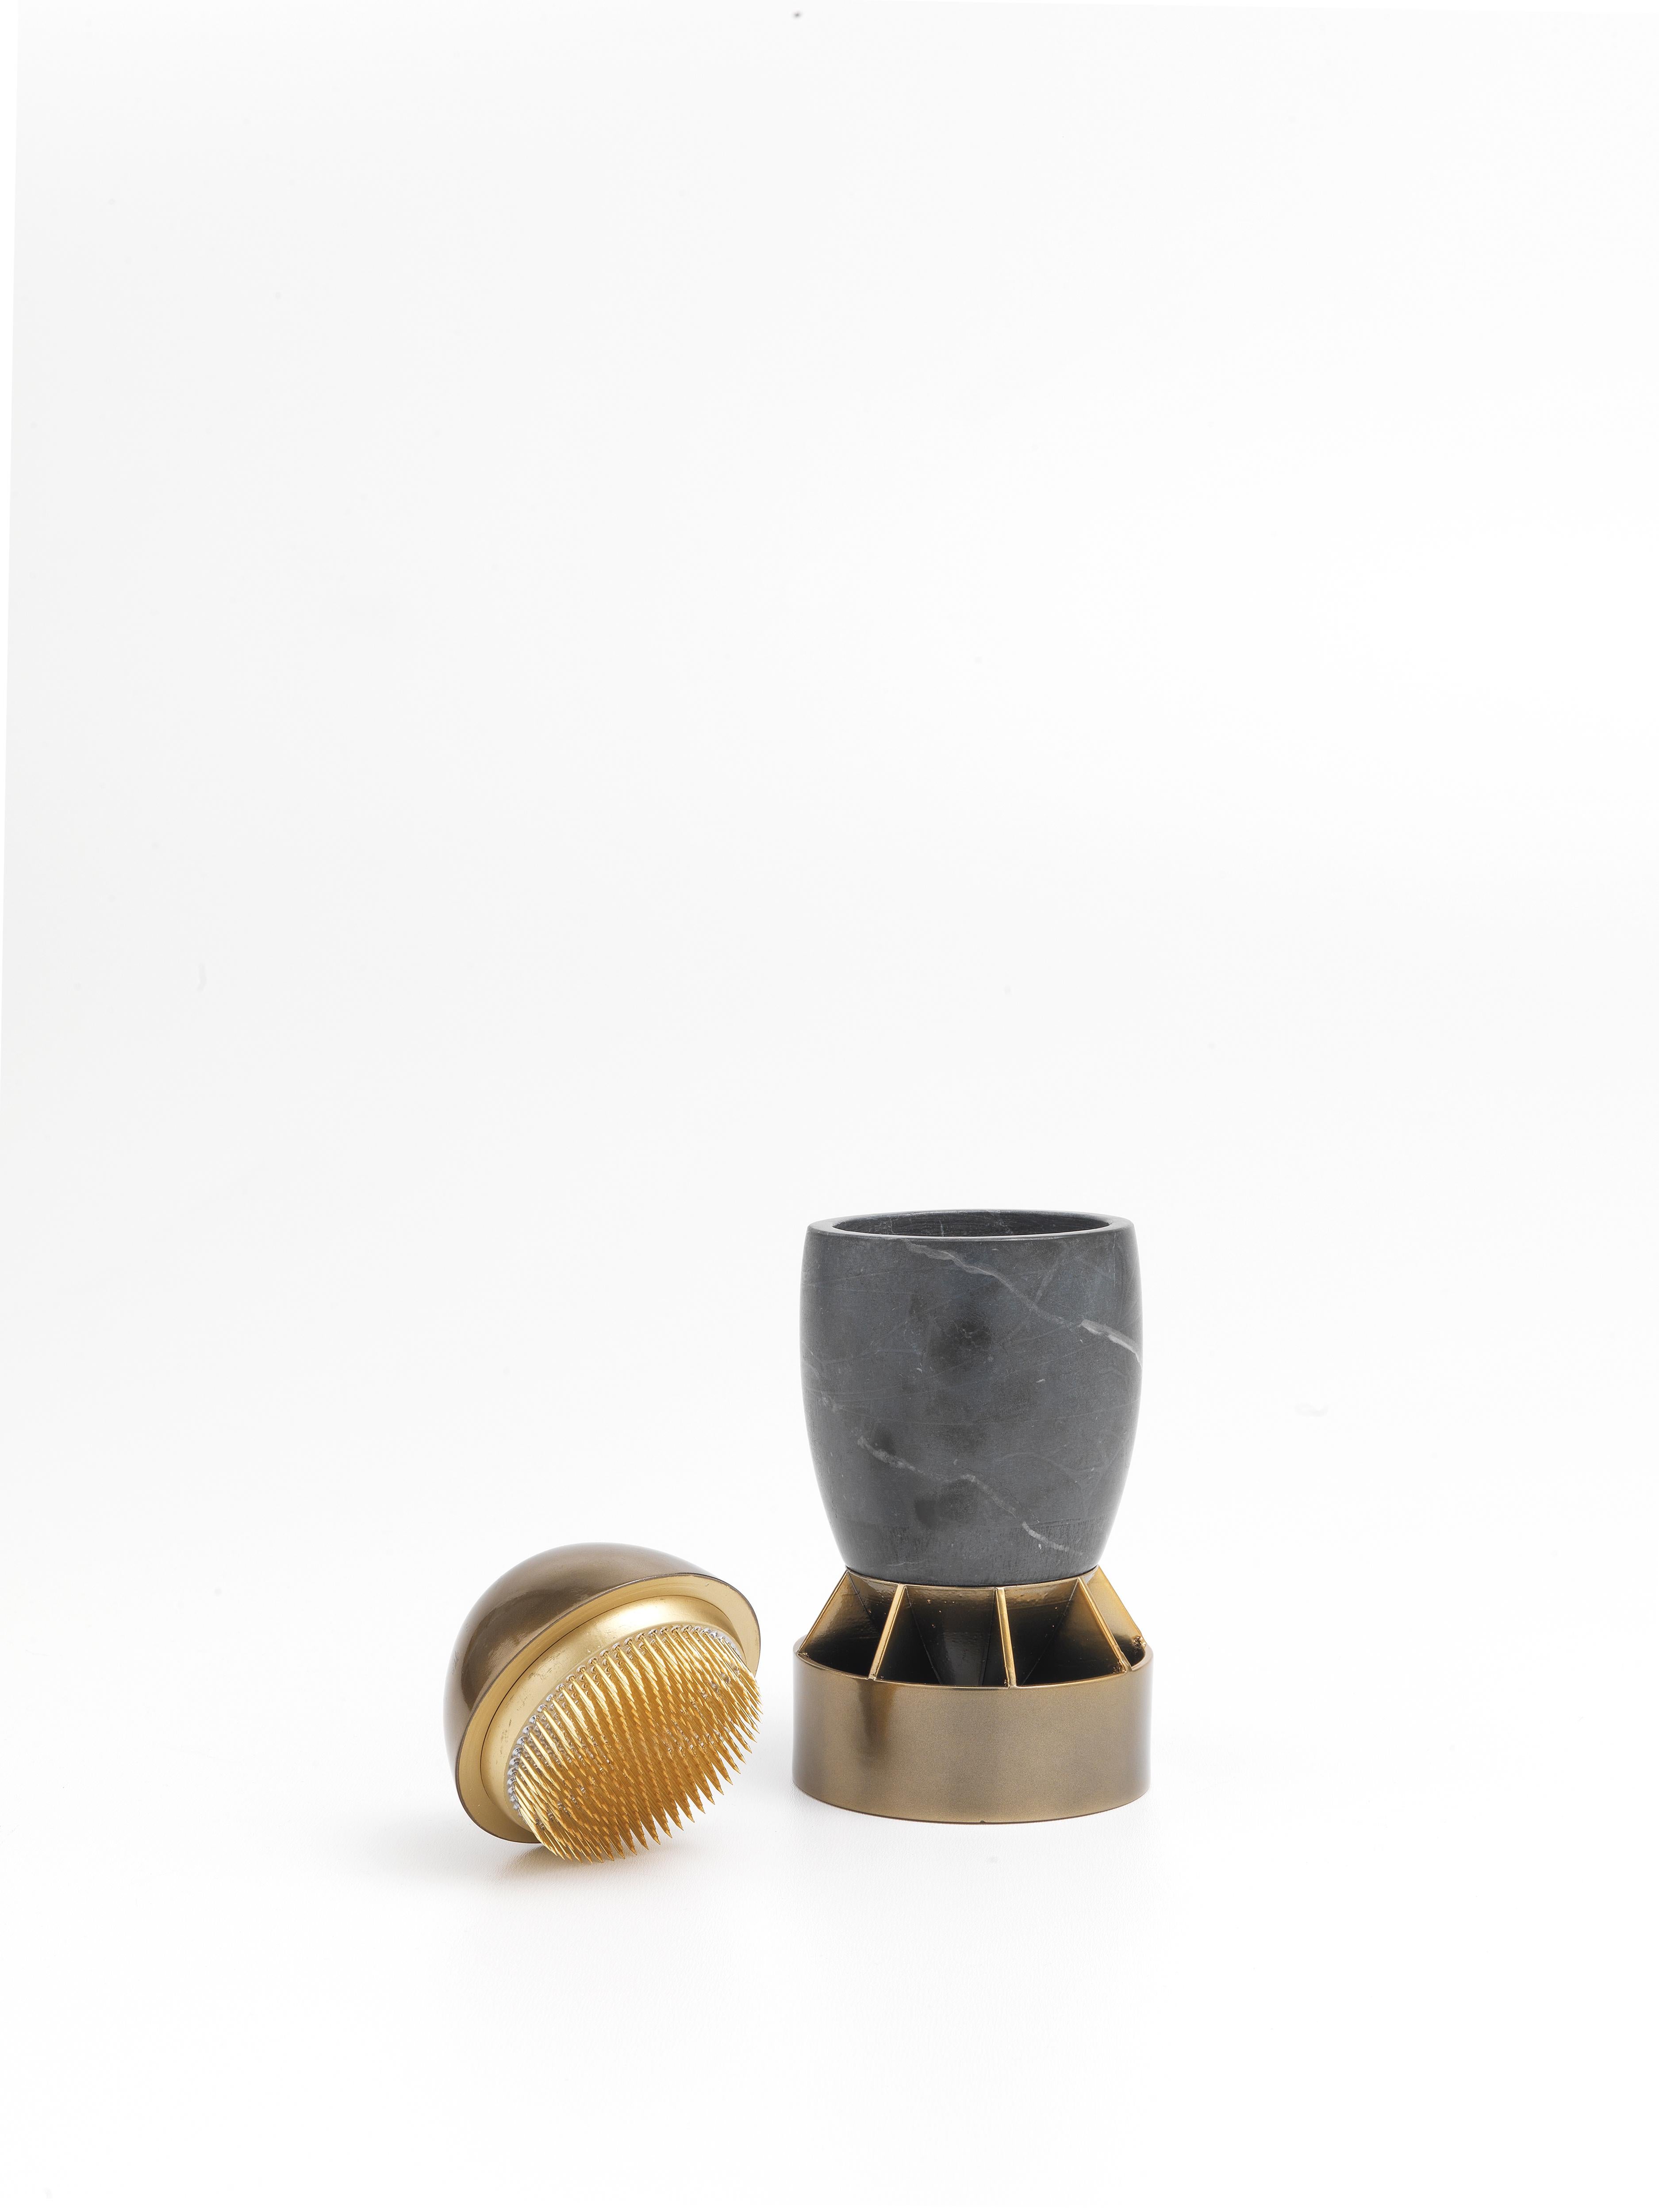 For Sale: Black (Nero Marquinia Marble) 21st Century Wanda Vase in Marble and 3D Printed ABS by Richard Yasmine 2